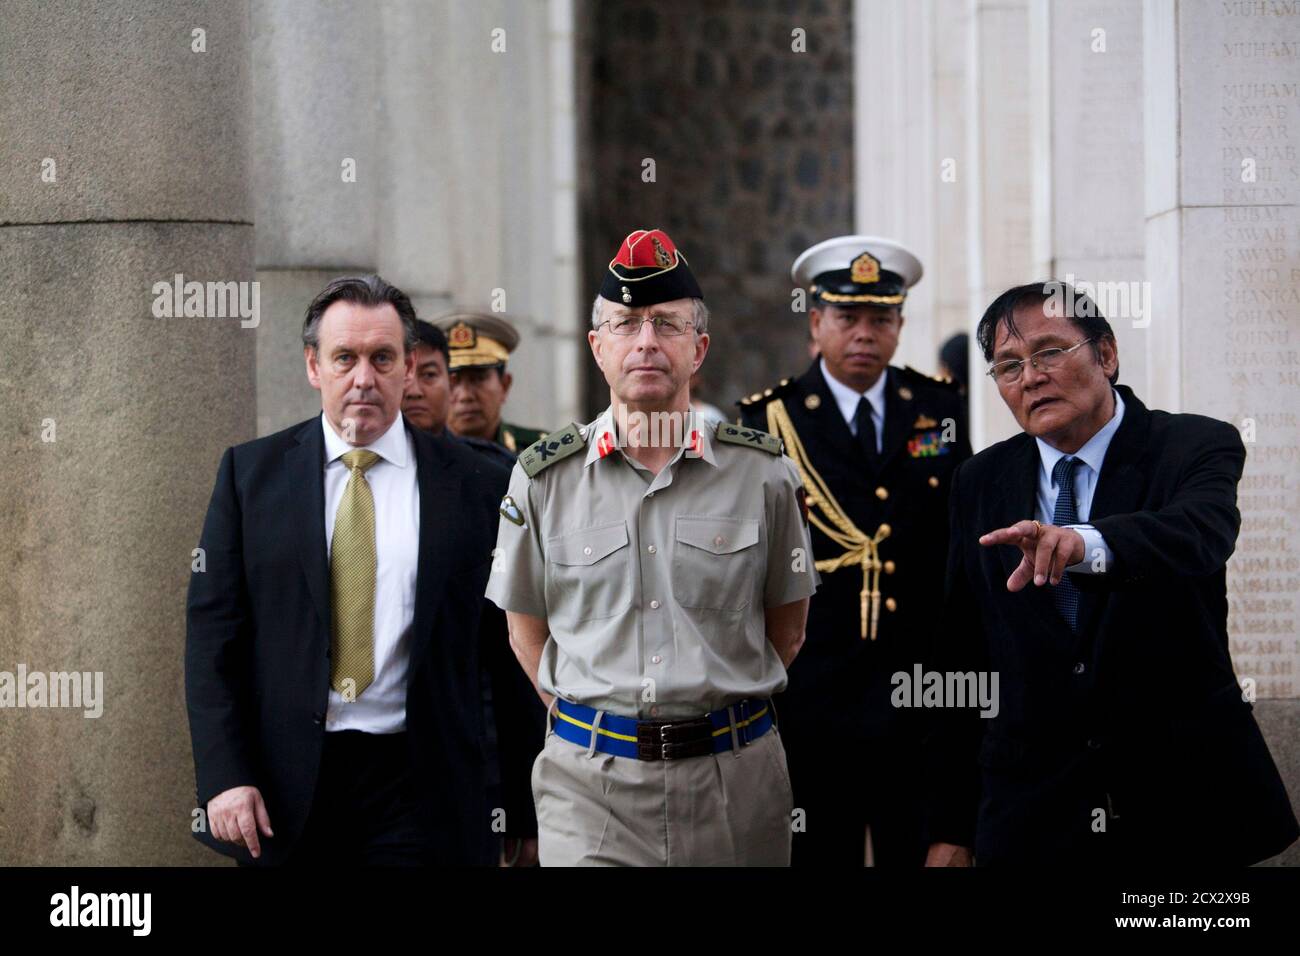 Britain's Chief of Defence Staff, General David Richards (C), visits Taukkyan war cemetery on the outskirts of Yangon, June 4, 2013. The cemetery is a memorial to Commonwealth soldiers who died in Burma, presently known as Myanmar, during World War Two. REUTERS/Minzayar (MYANMAR - Tags: MILITARY POLITICS CONFLICT) Stock Photo